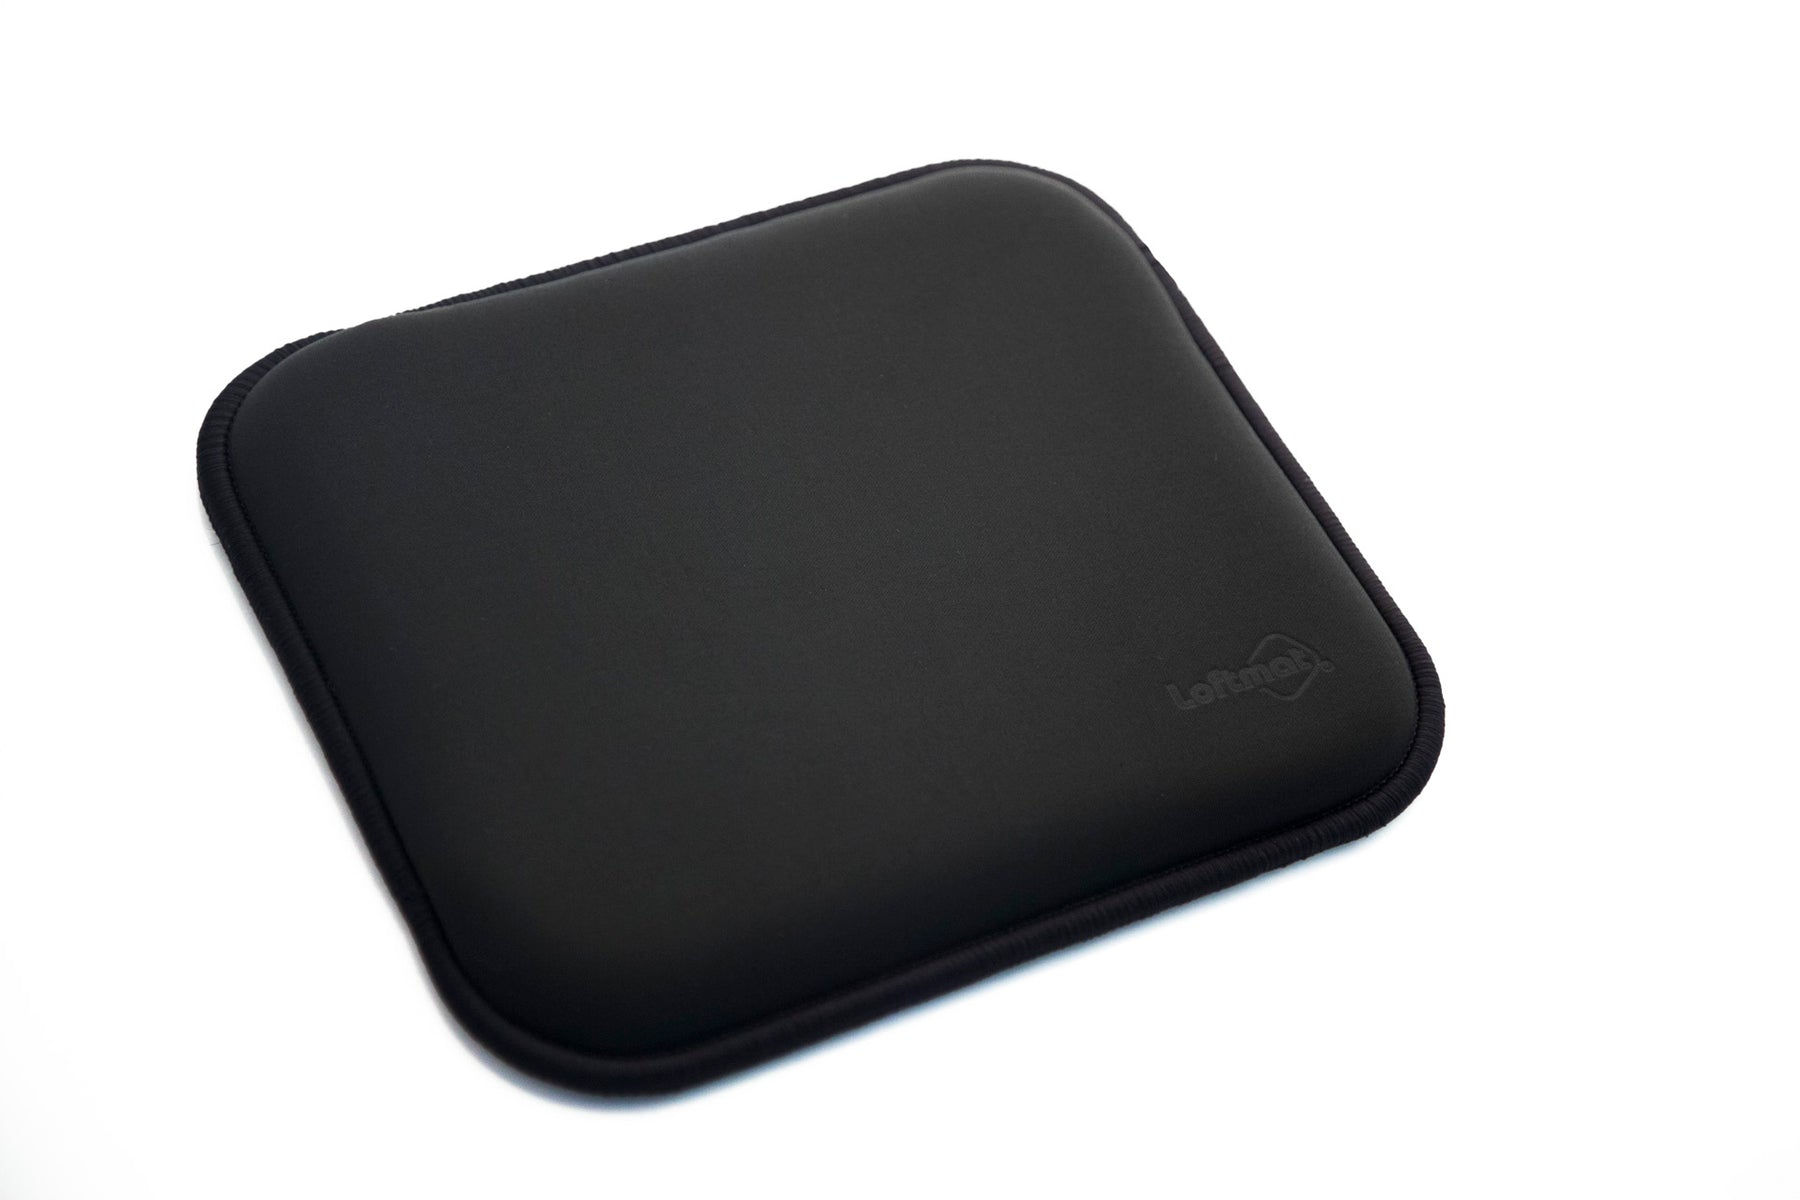 LOFTMAT (8x9 inch) Cushioned Mouse Pad - "The Office Small" - Black Color